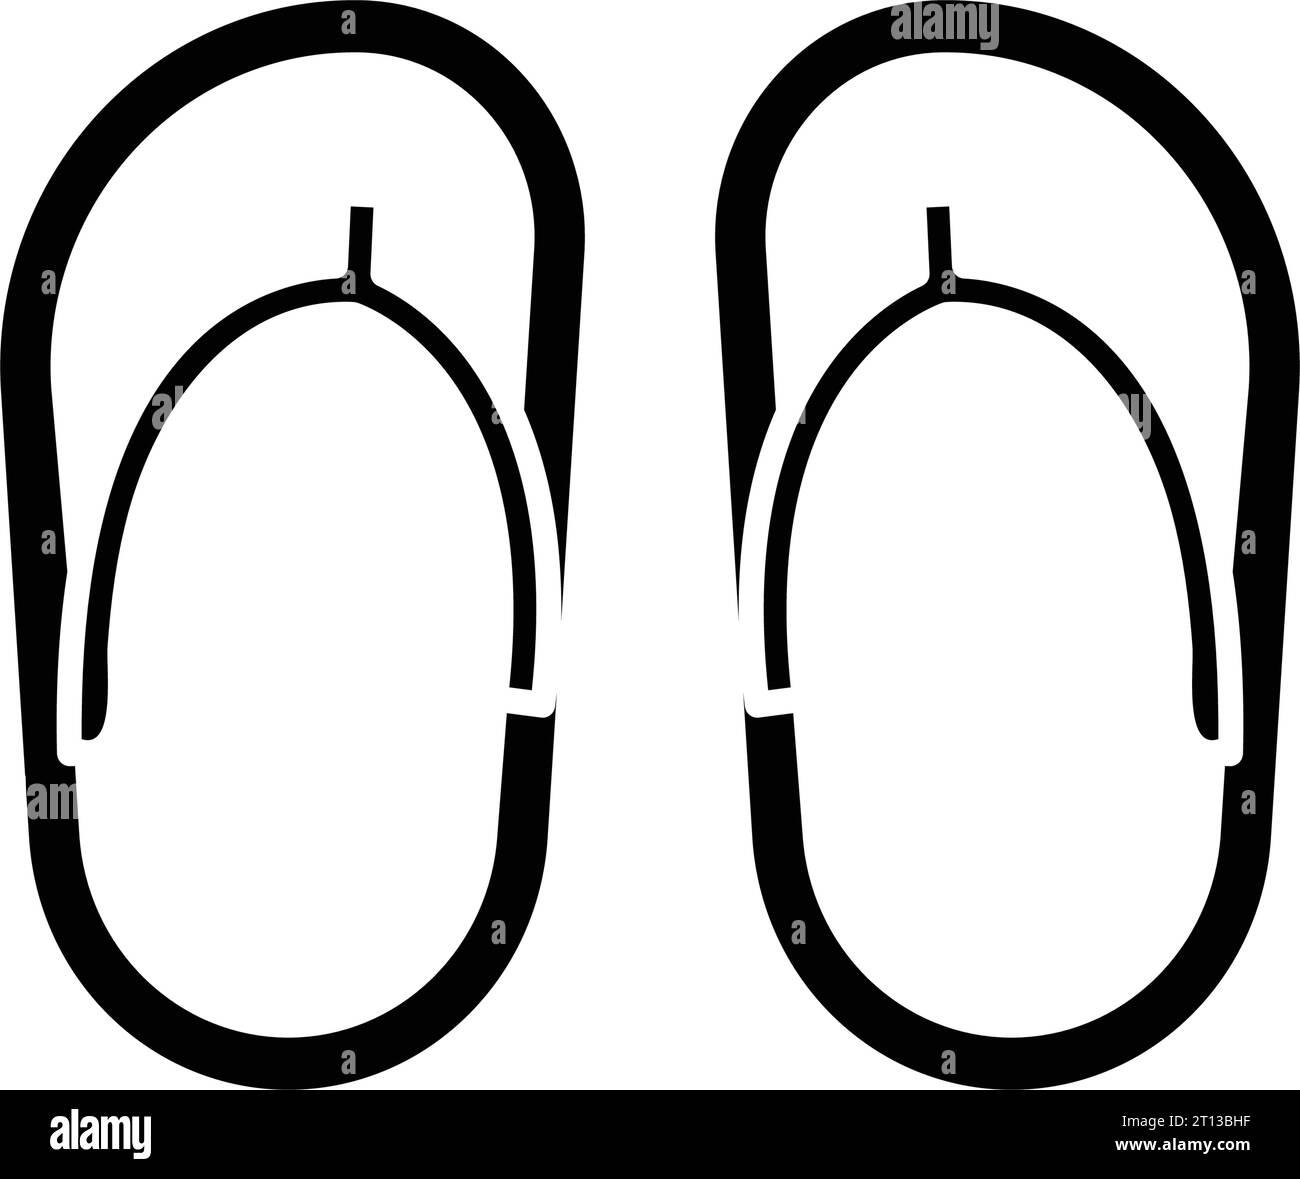 Flip flop icon line design template isolated illustration Stock Vector